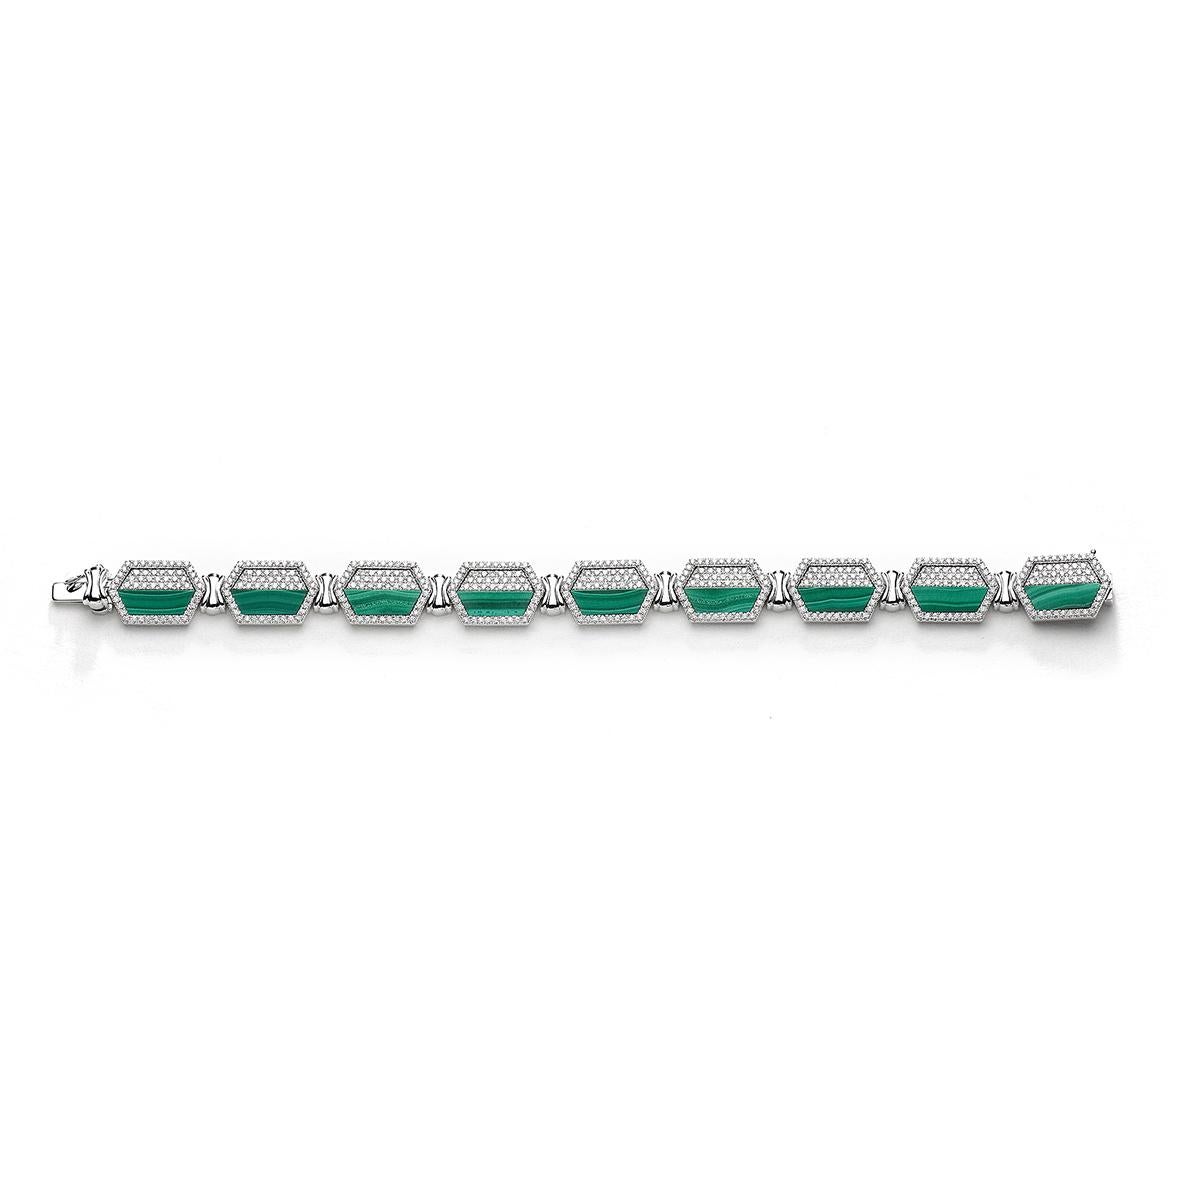  Bracelet in 18kt white gold set with 495 diamonds 3.35 cts and 9 malachites 13.51 cts